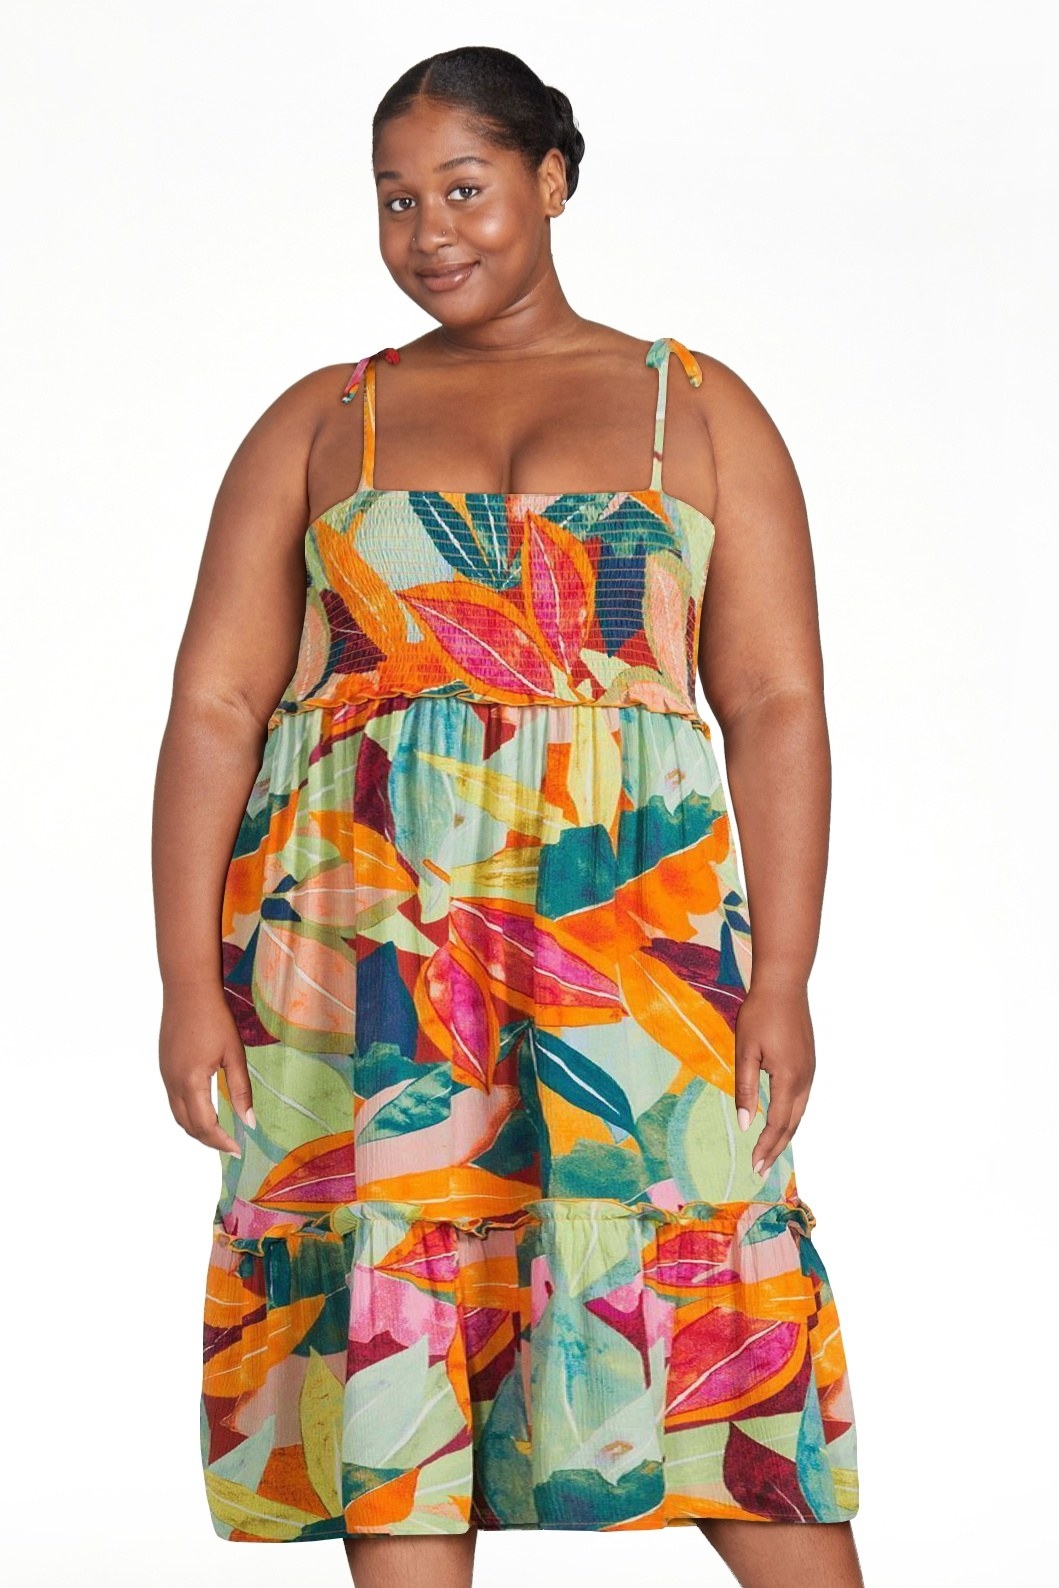 model wearing a tropical-print dress with ties on the shoulder straps